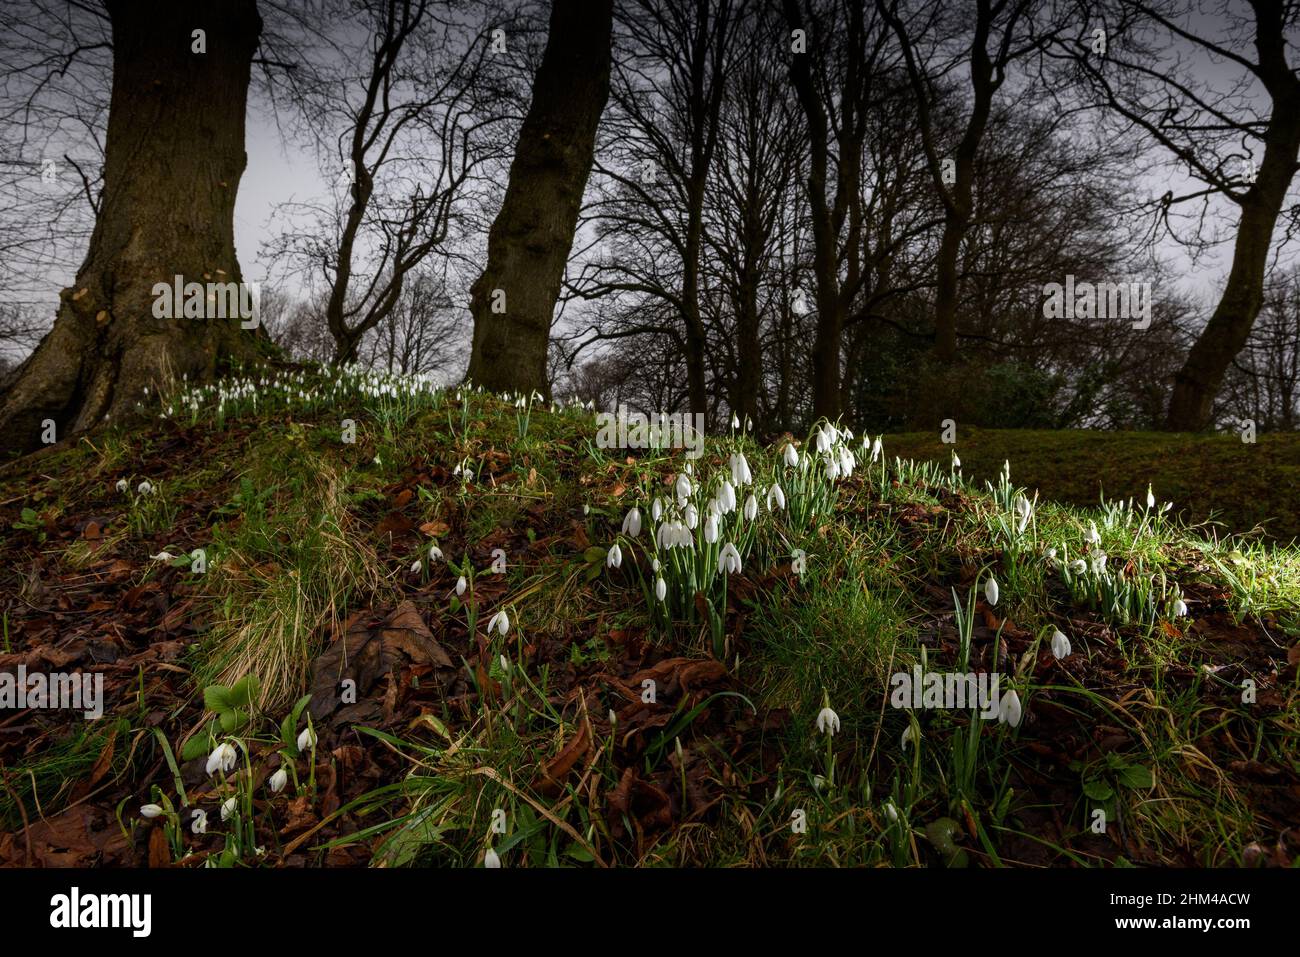 Bolton, Lancashire, UK, Monday February 07, 2022. A beautiful crop of Snowdrops brightens up a dull and damp start to the week at Queen's Park, Bolton. Credit: Paul Heyes/Alamy Live News Stock Photo